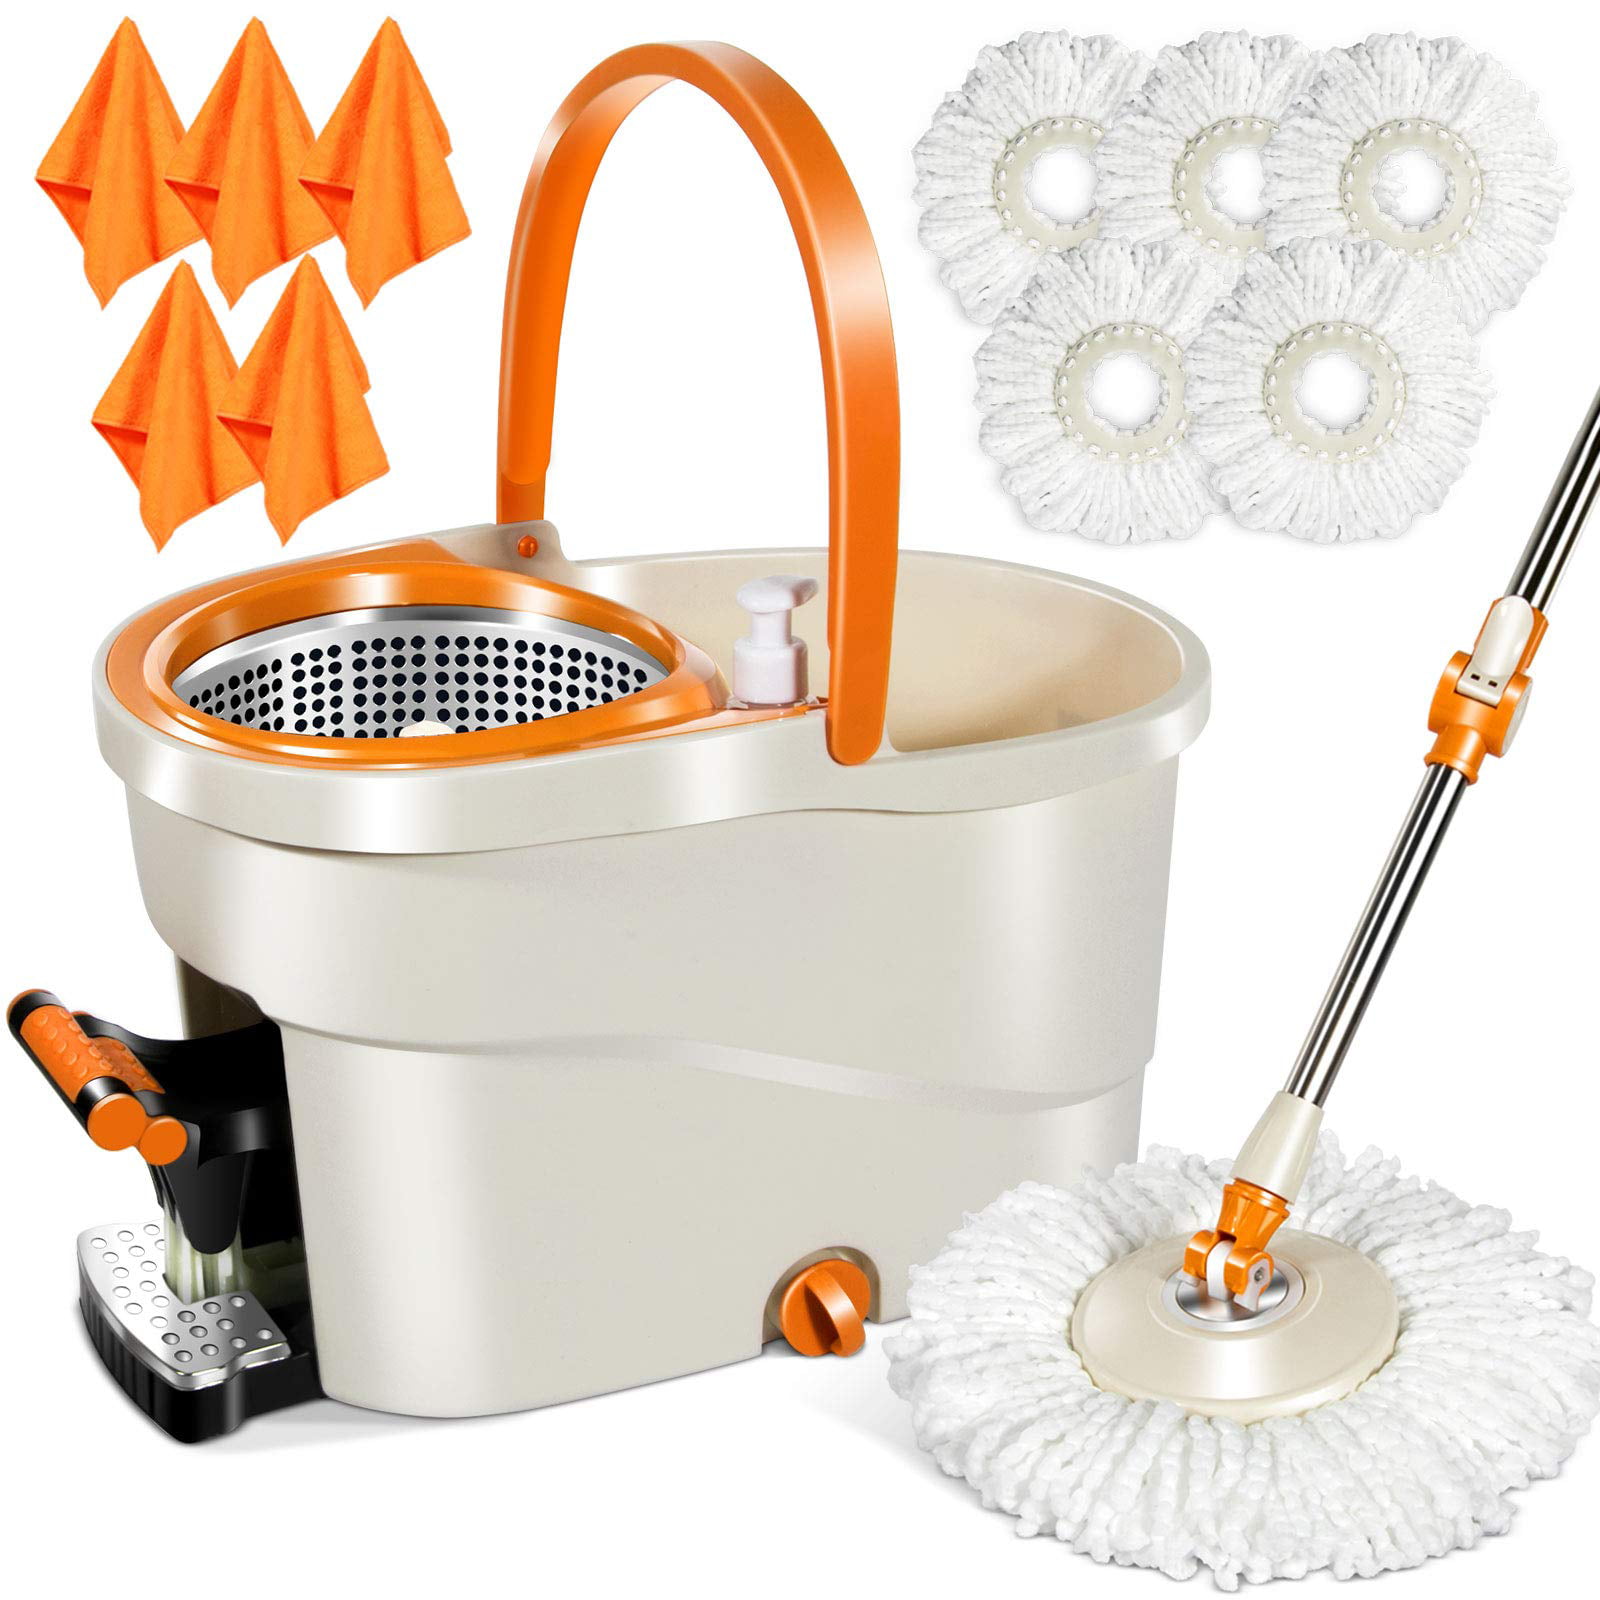 Details about   SPIN MOPS 360° SPINNING MOP & BUCKET HOME CLEANING & Free Wall Mount Pole Holder 